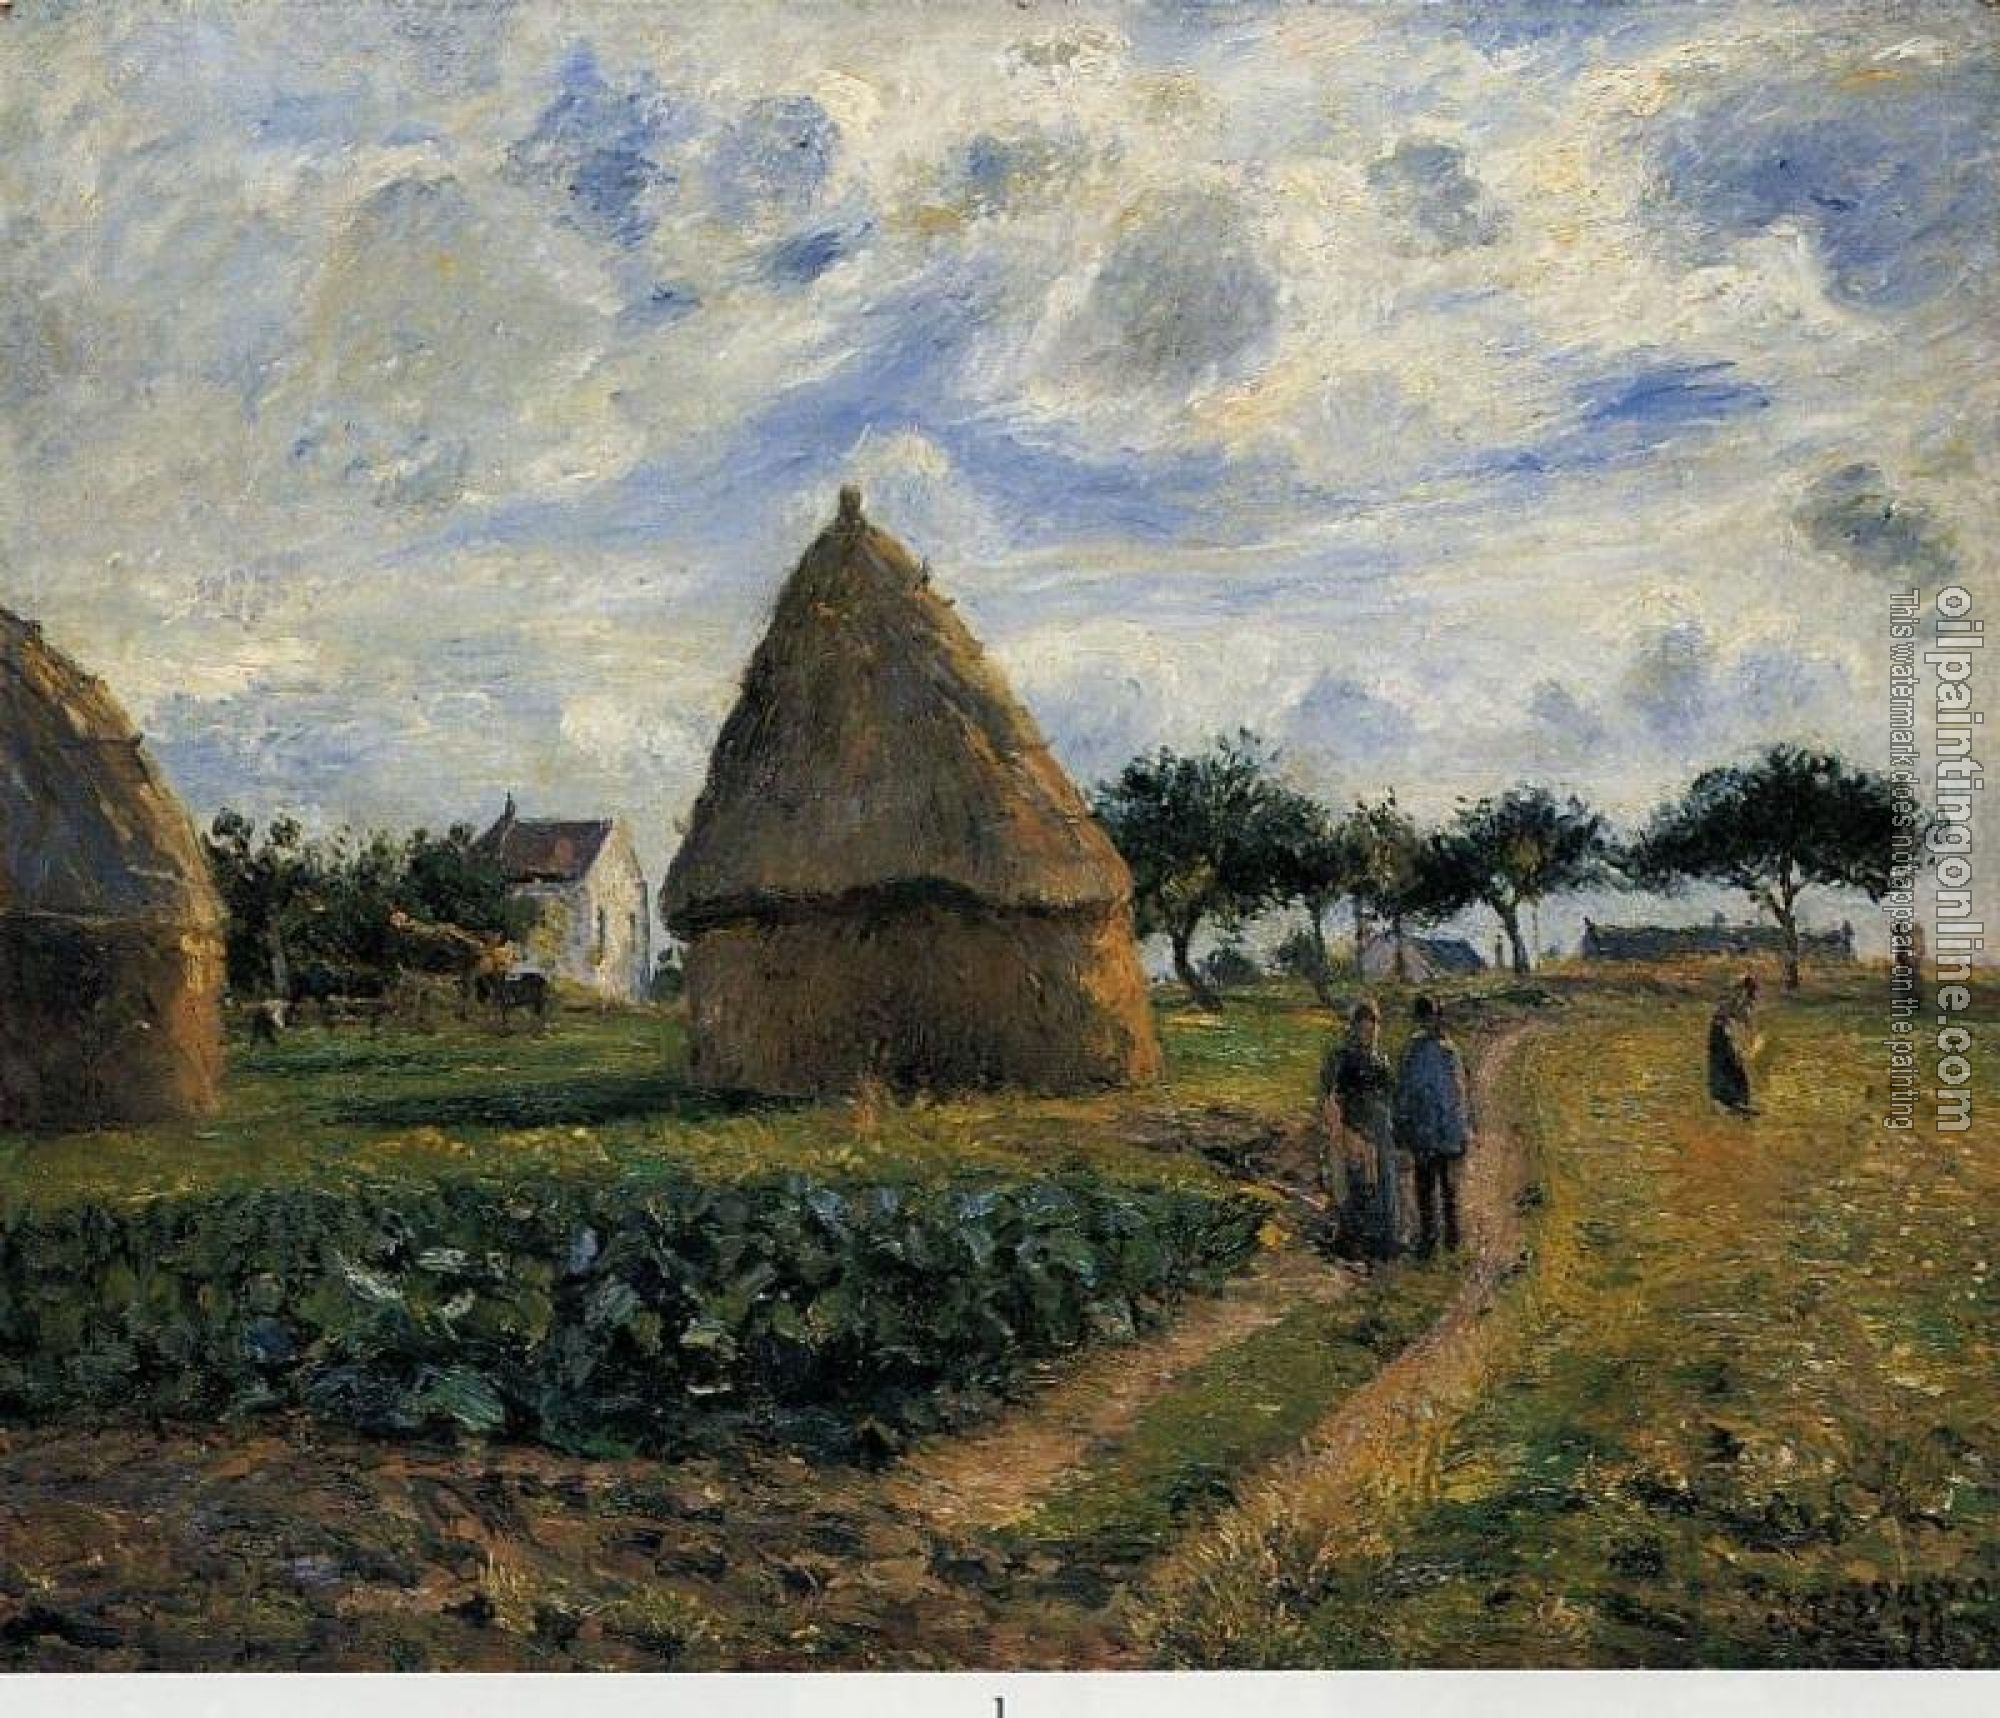 Pissarro, Camille - Peasants and Hay Stacks